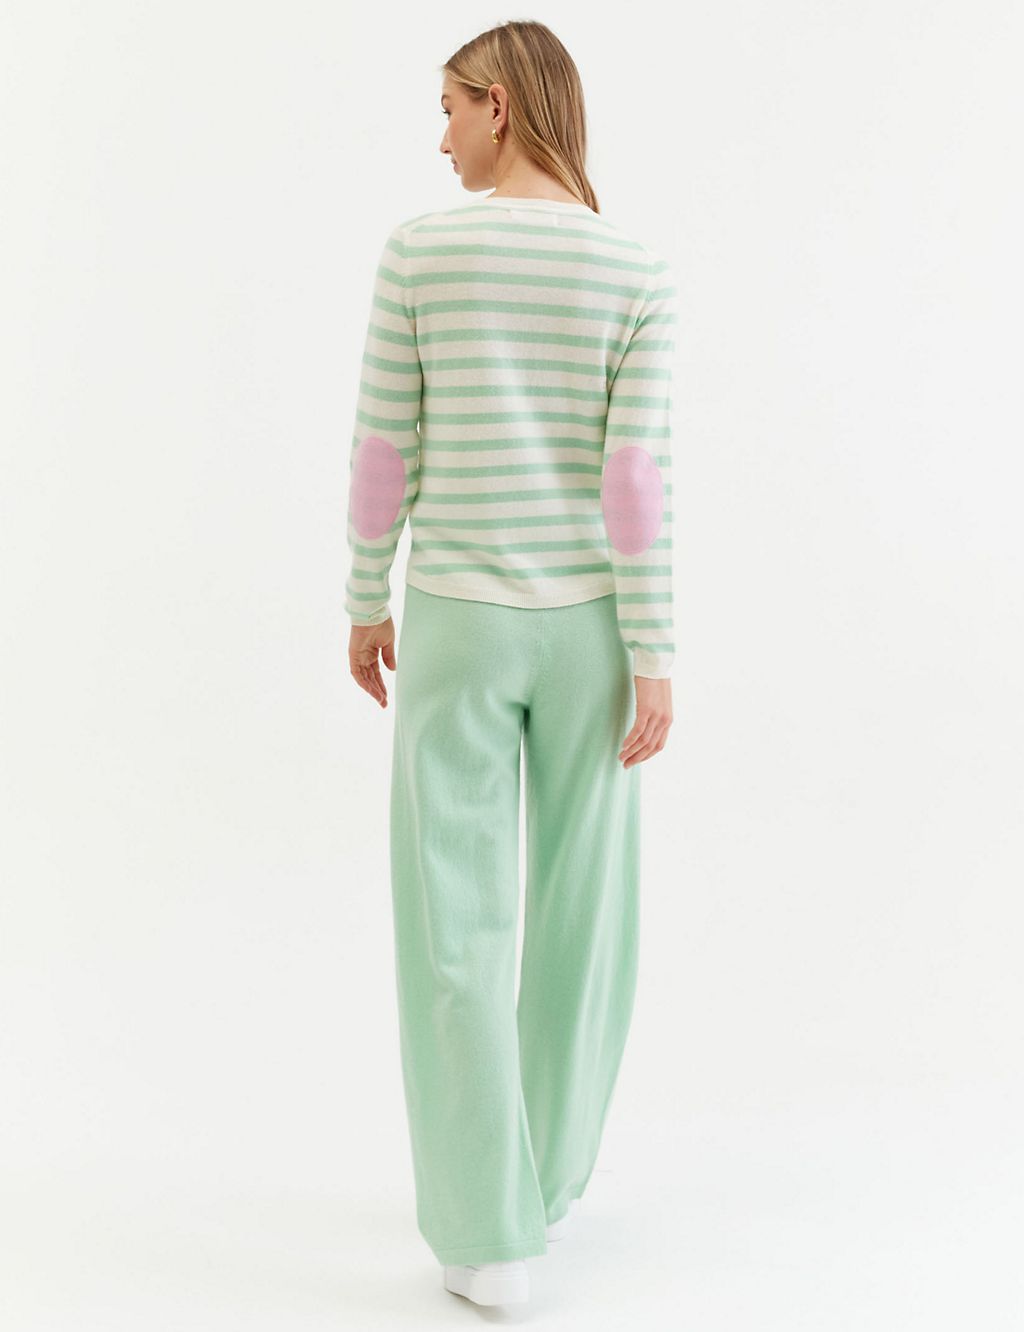 Wool Rich Striped Sweatshirt with Cashmere 4 of 4